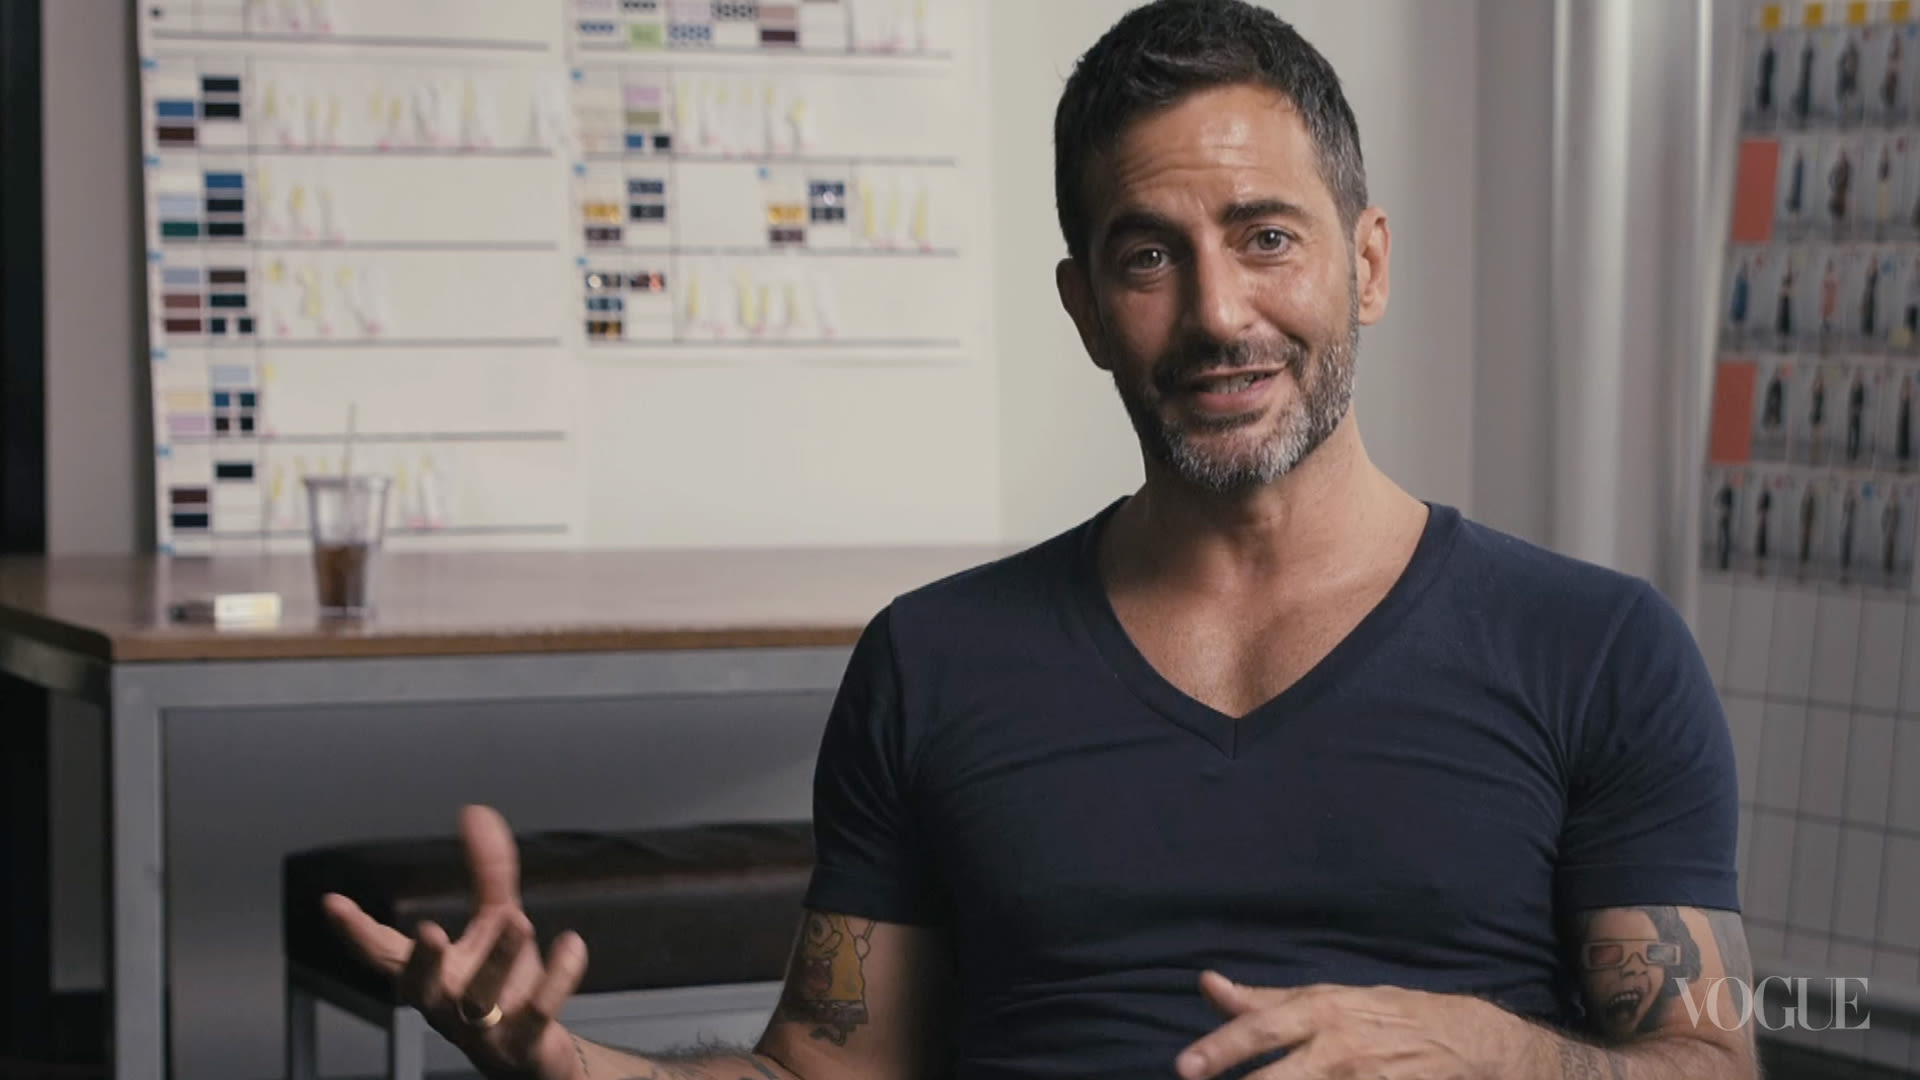 Marc Jacobs Chooses His Time Wisely - The New York Times